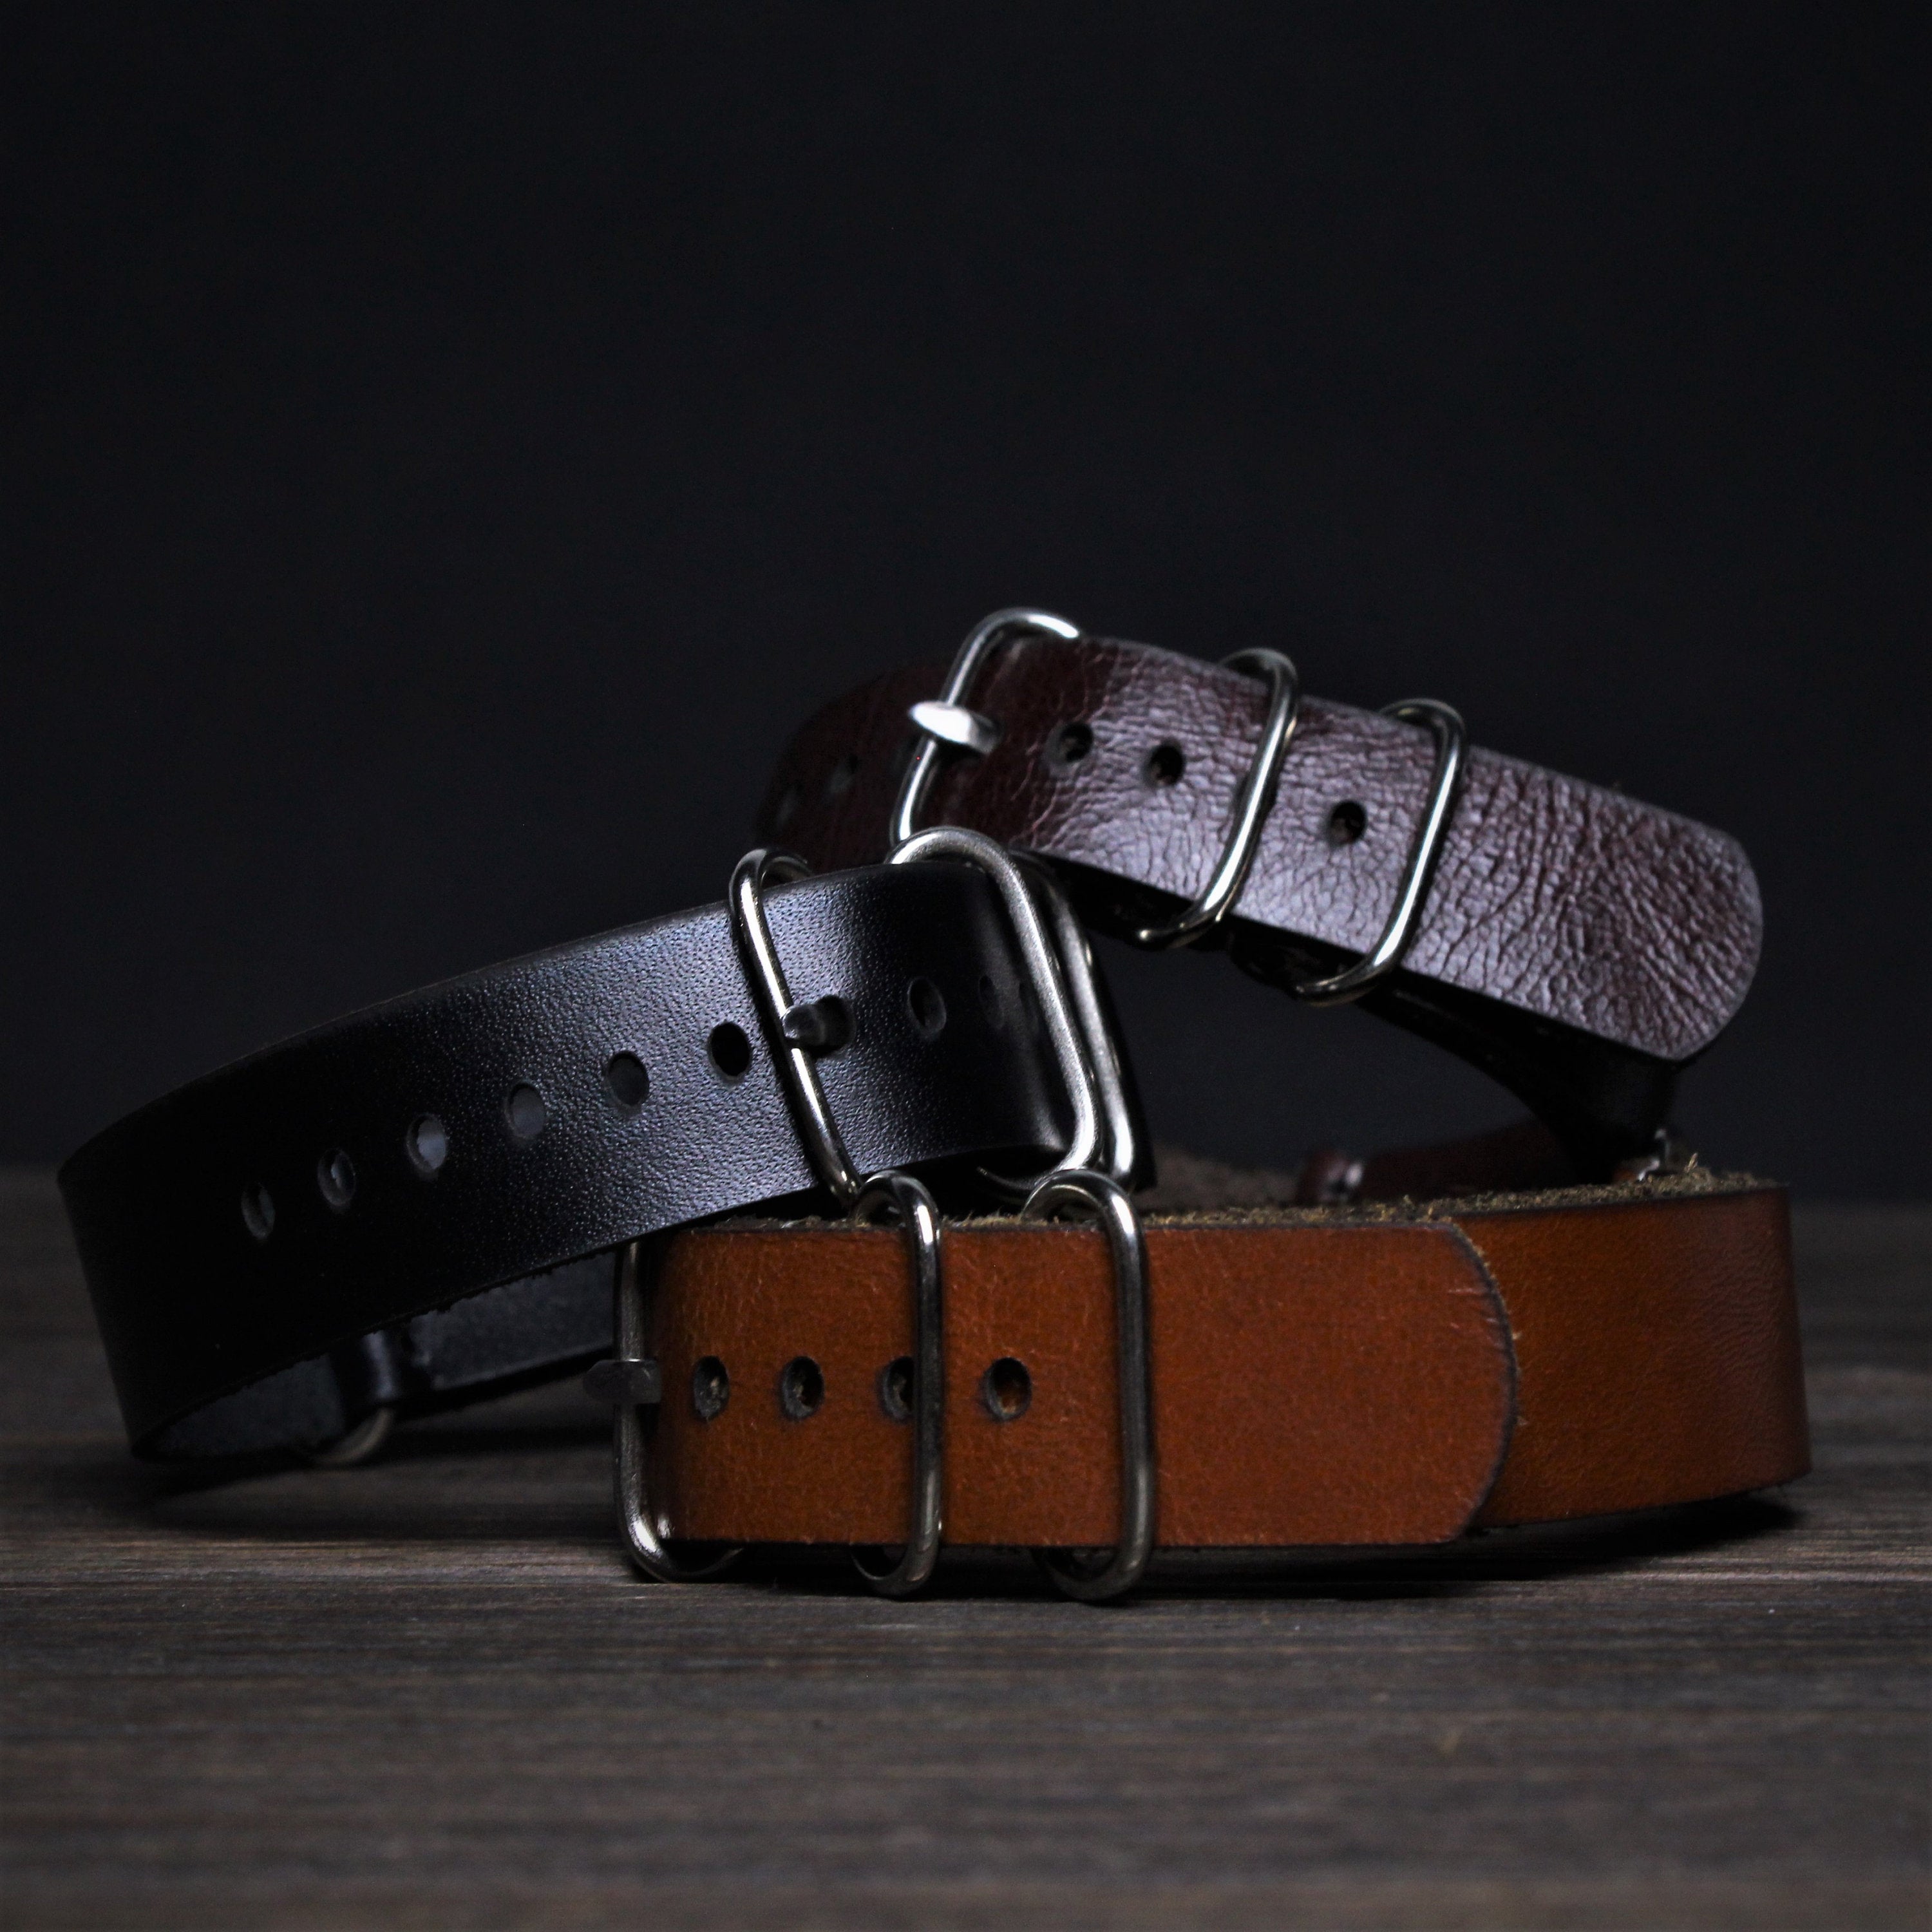 Leather Strap 18 mm, watches strap, vintage style strap, leather strap, watch band, Black strap